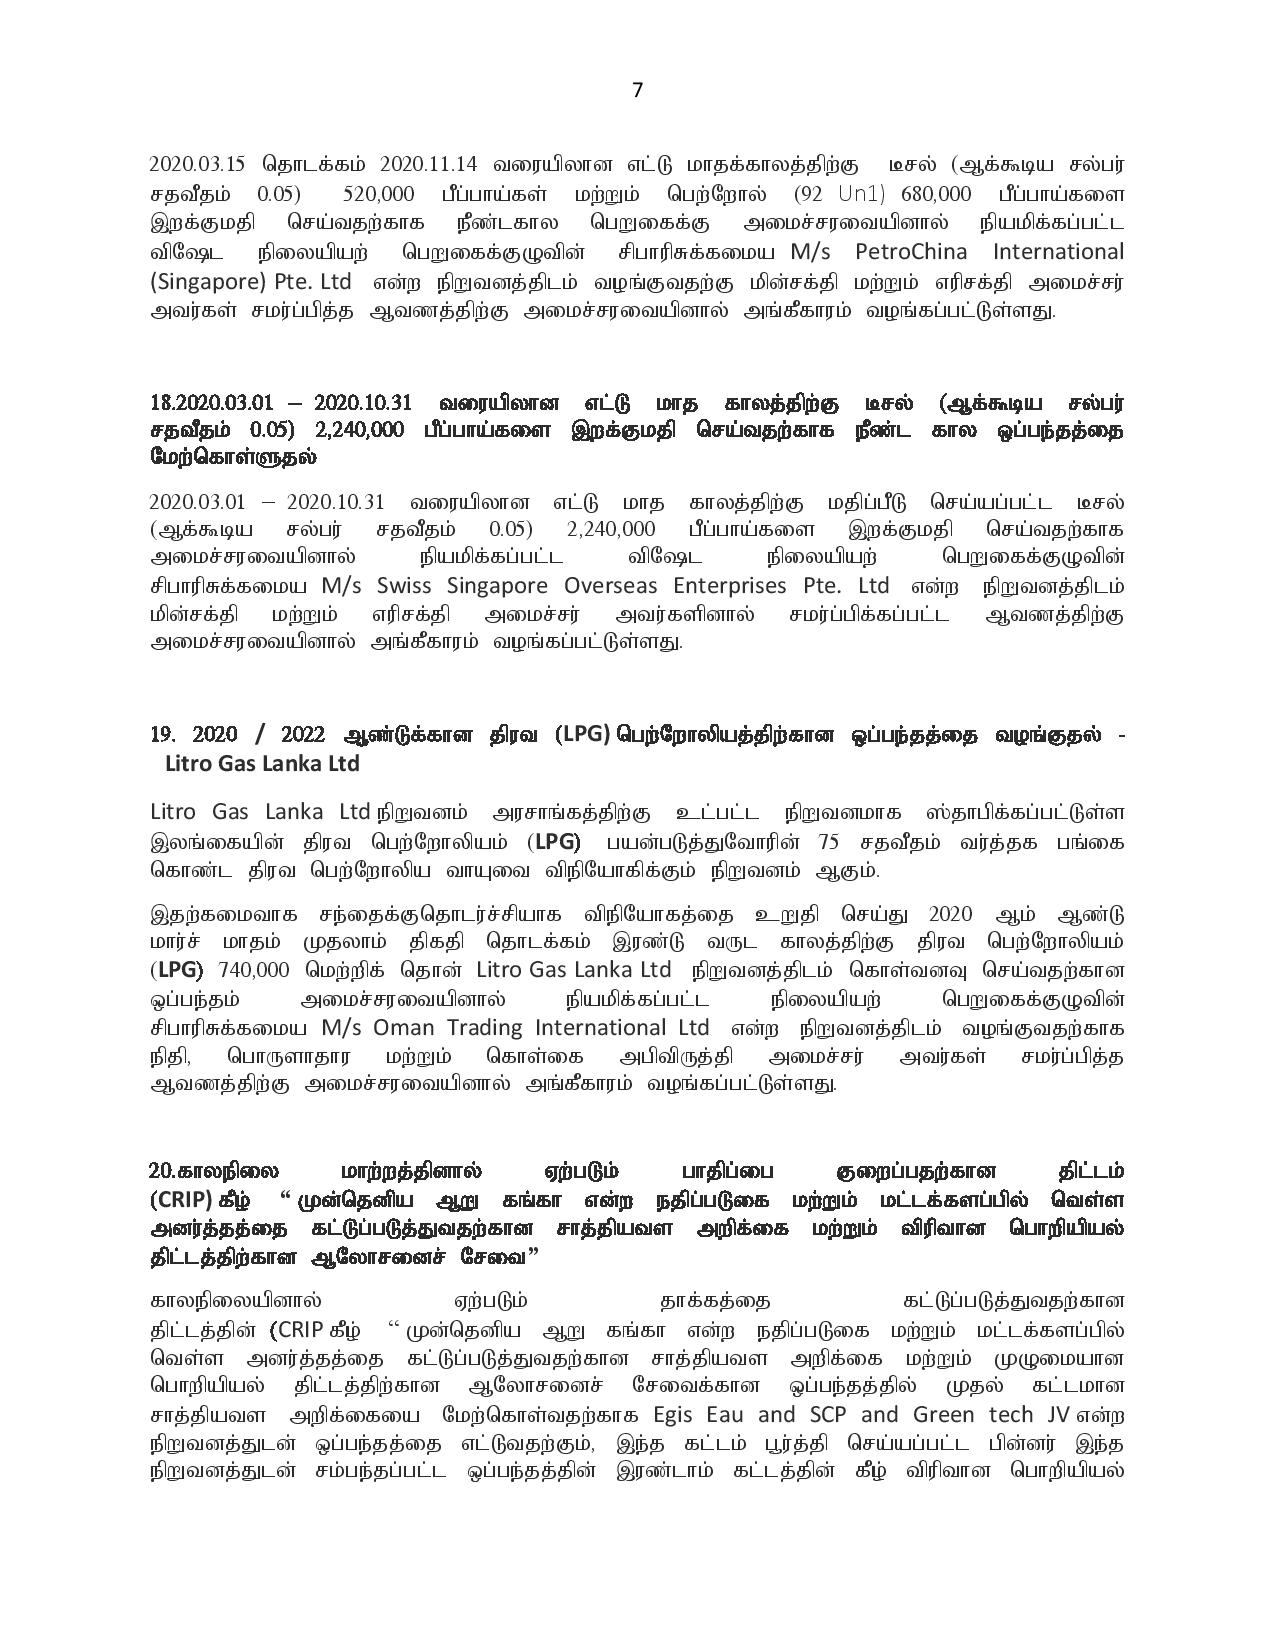 05.02.2020 Cabinet Tamil page 007